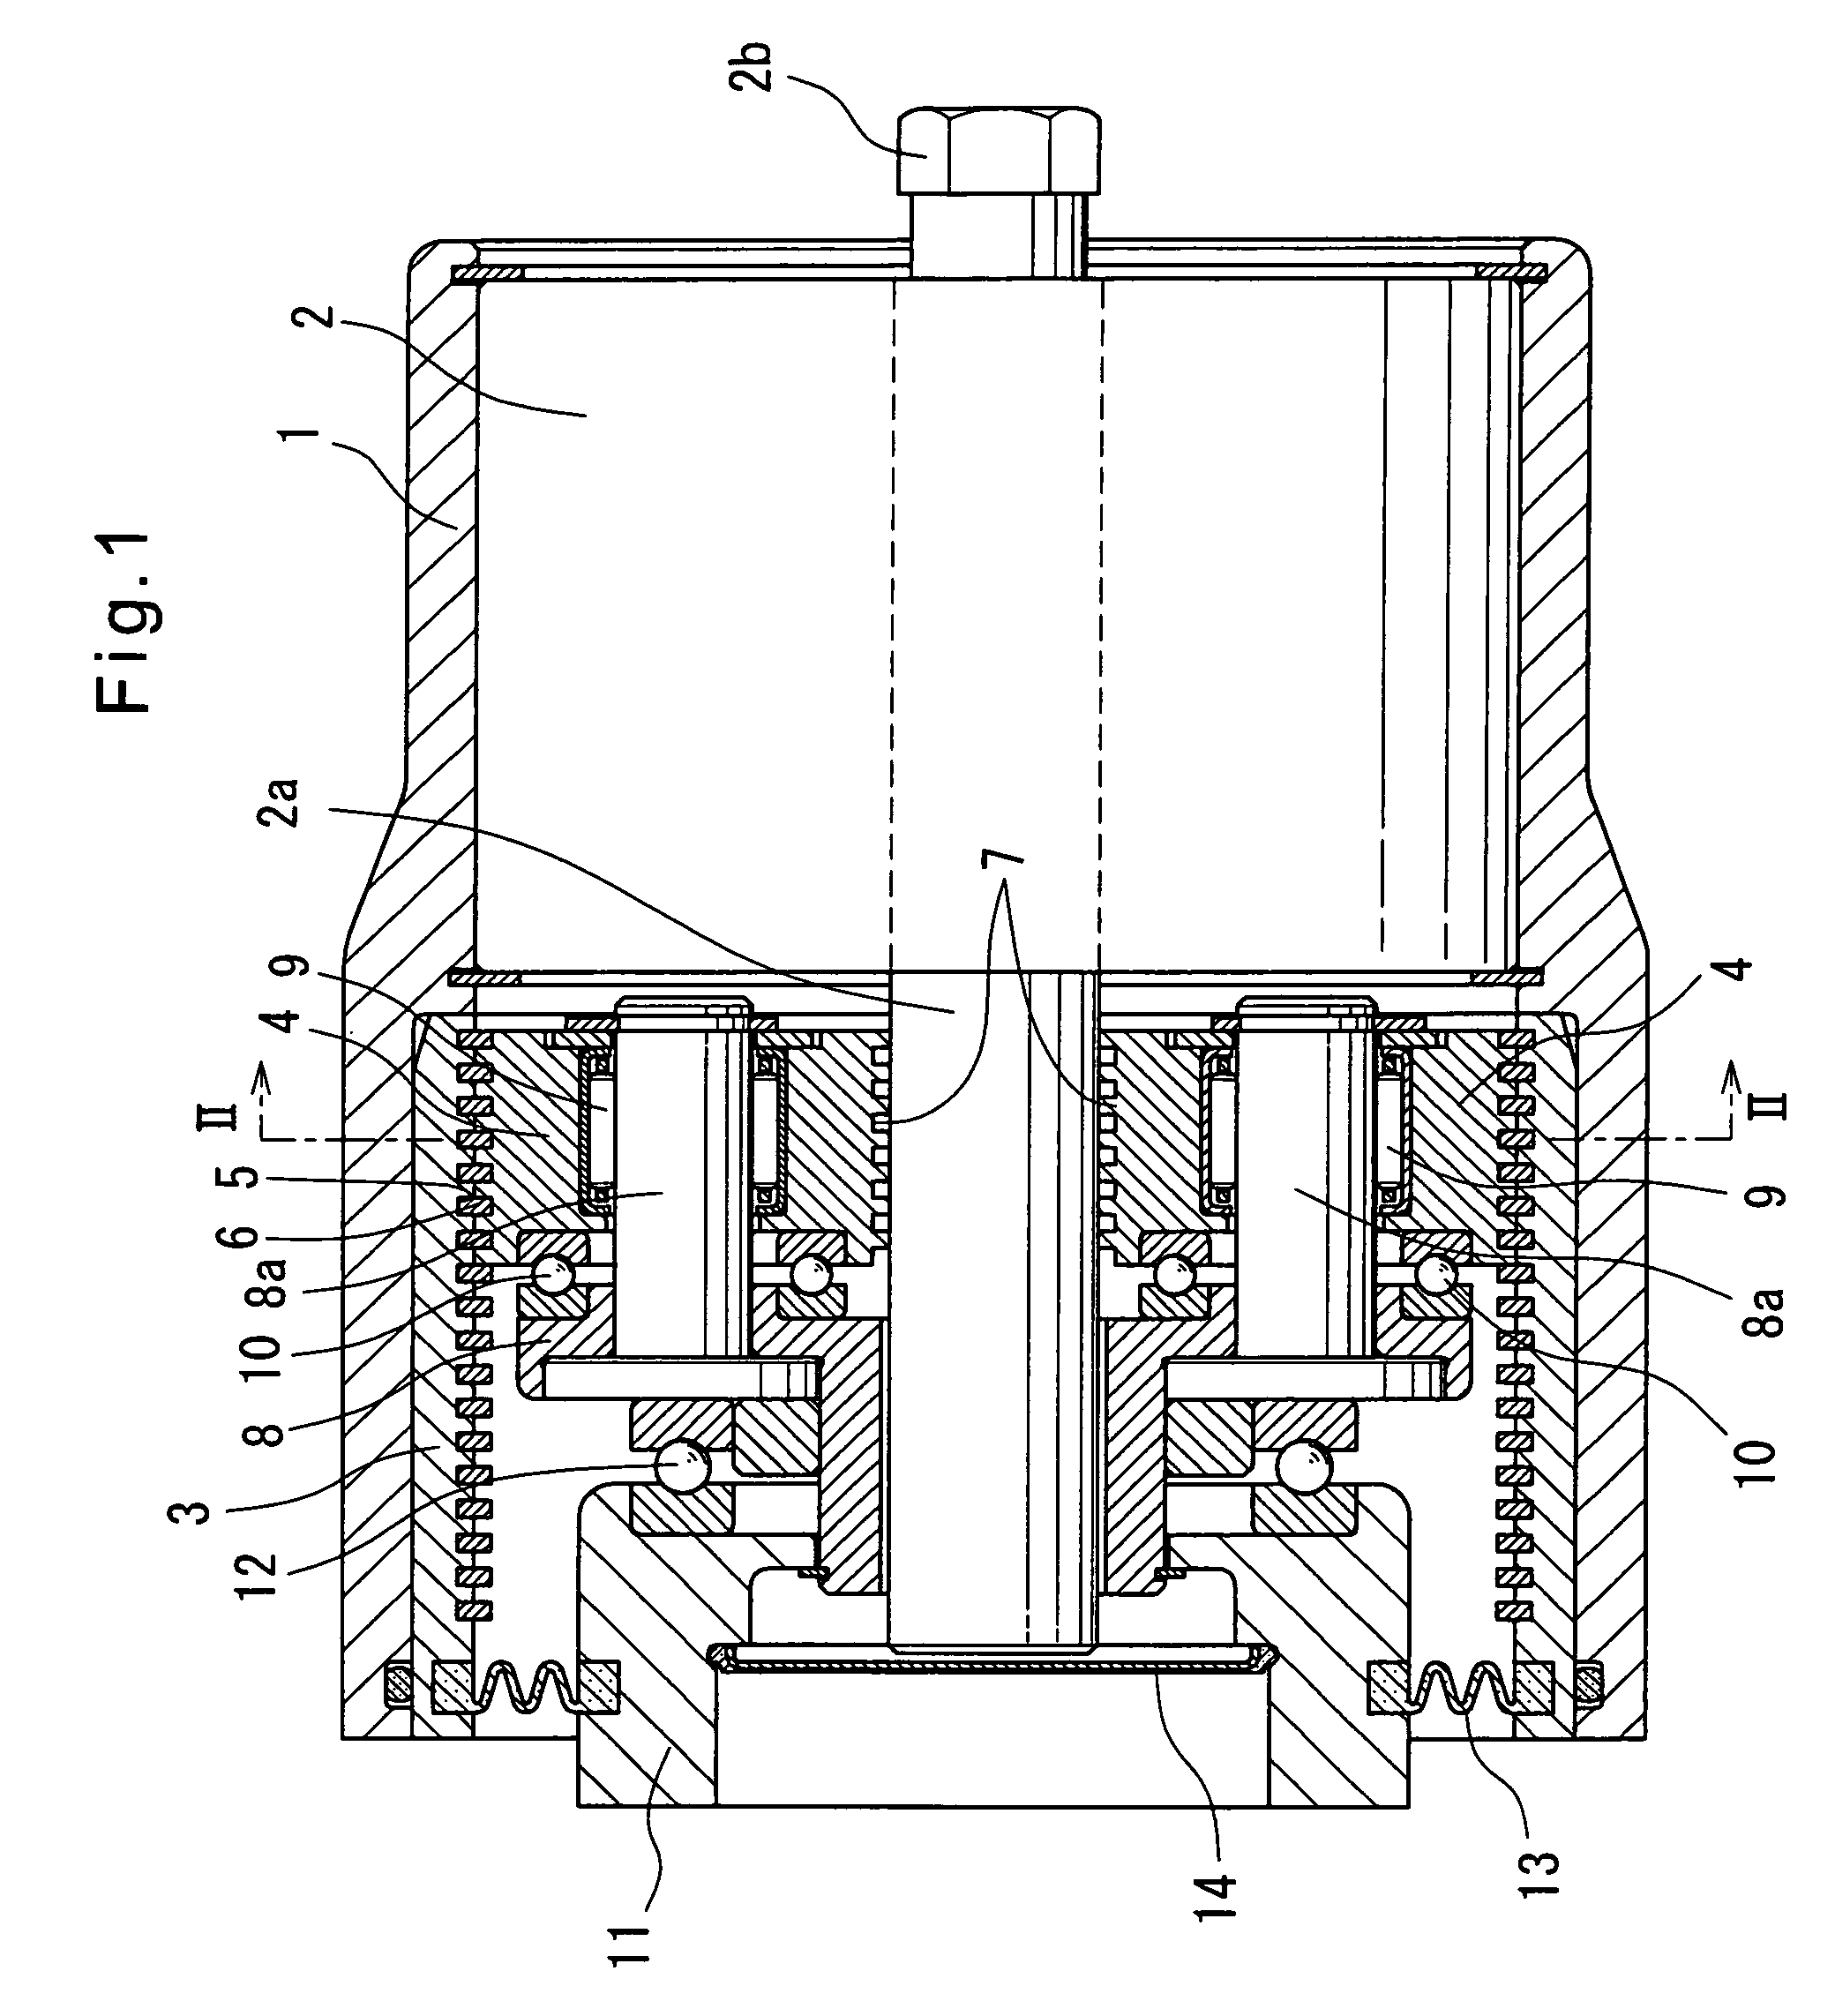 Electric linear-motion actuator and electric brake assembly